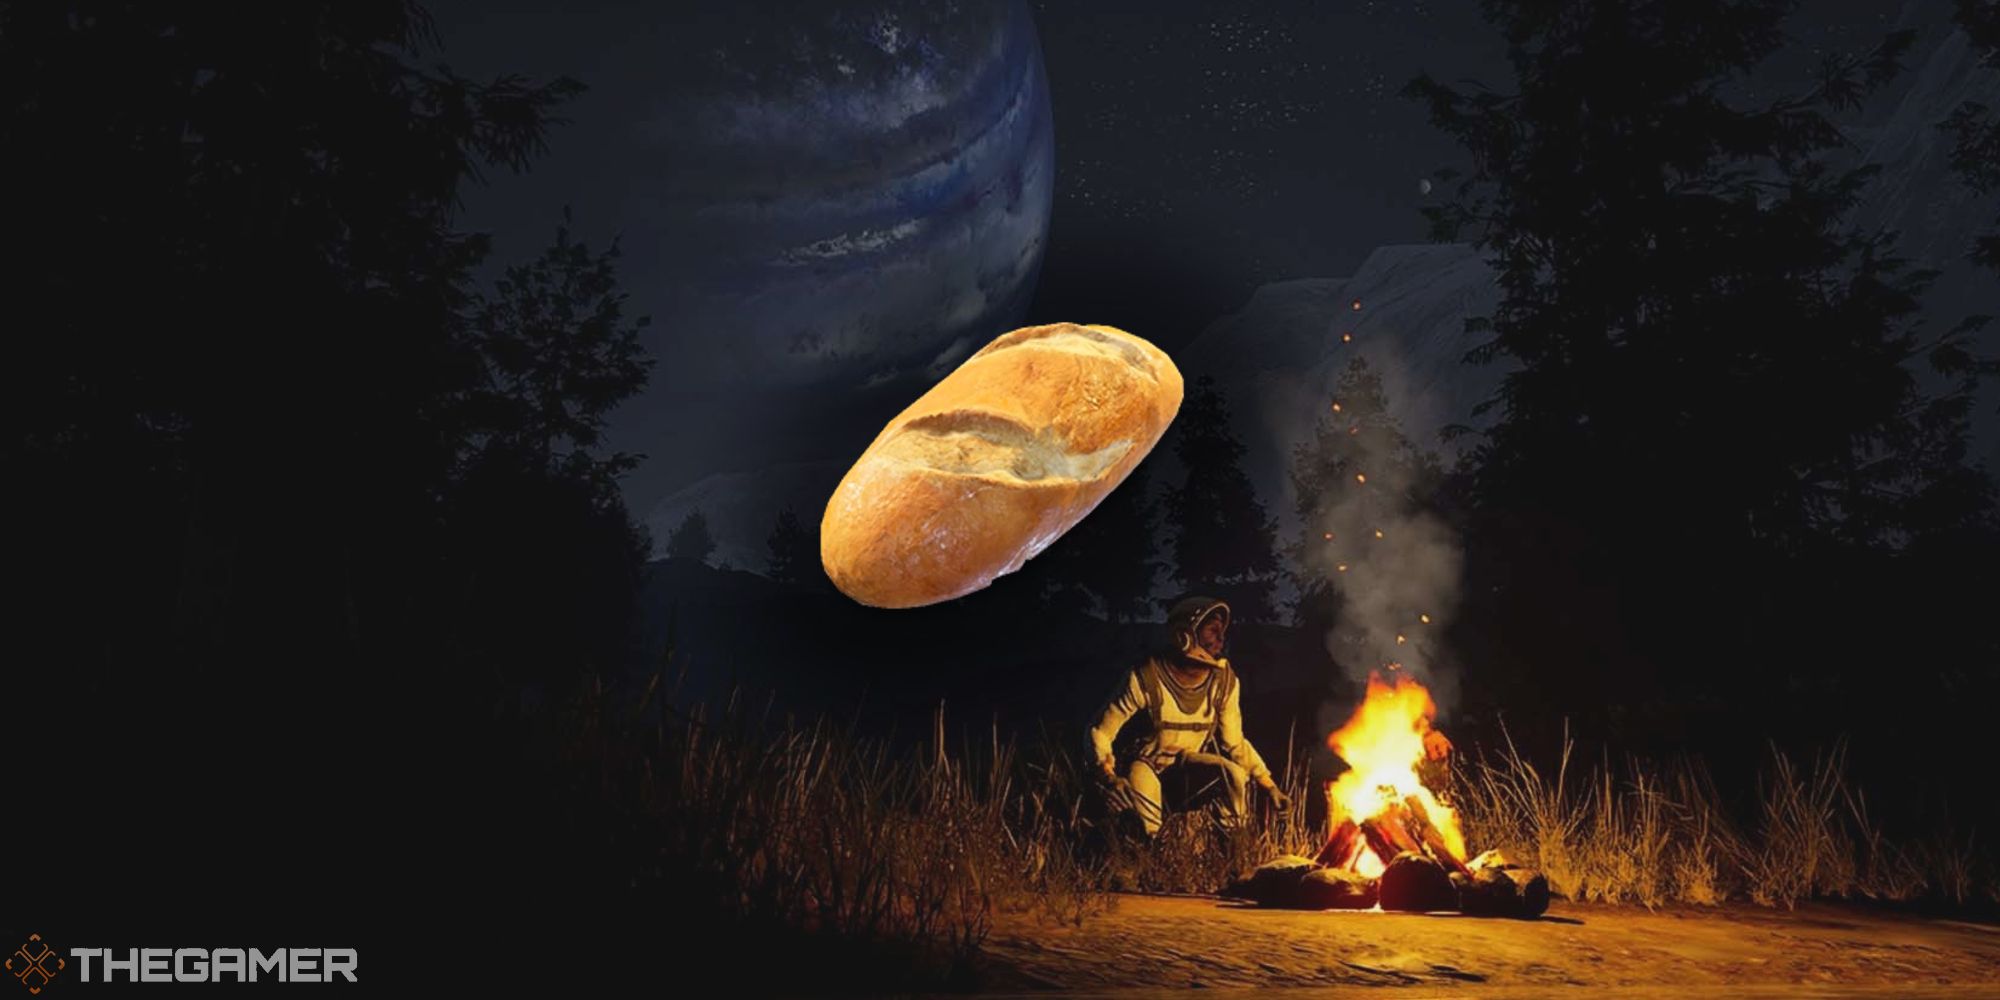 image of bread over image of player sitting in front of campfire